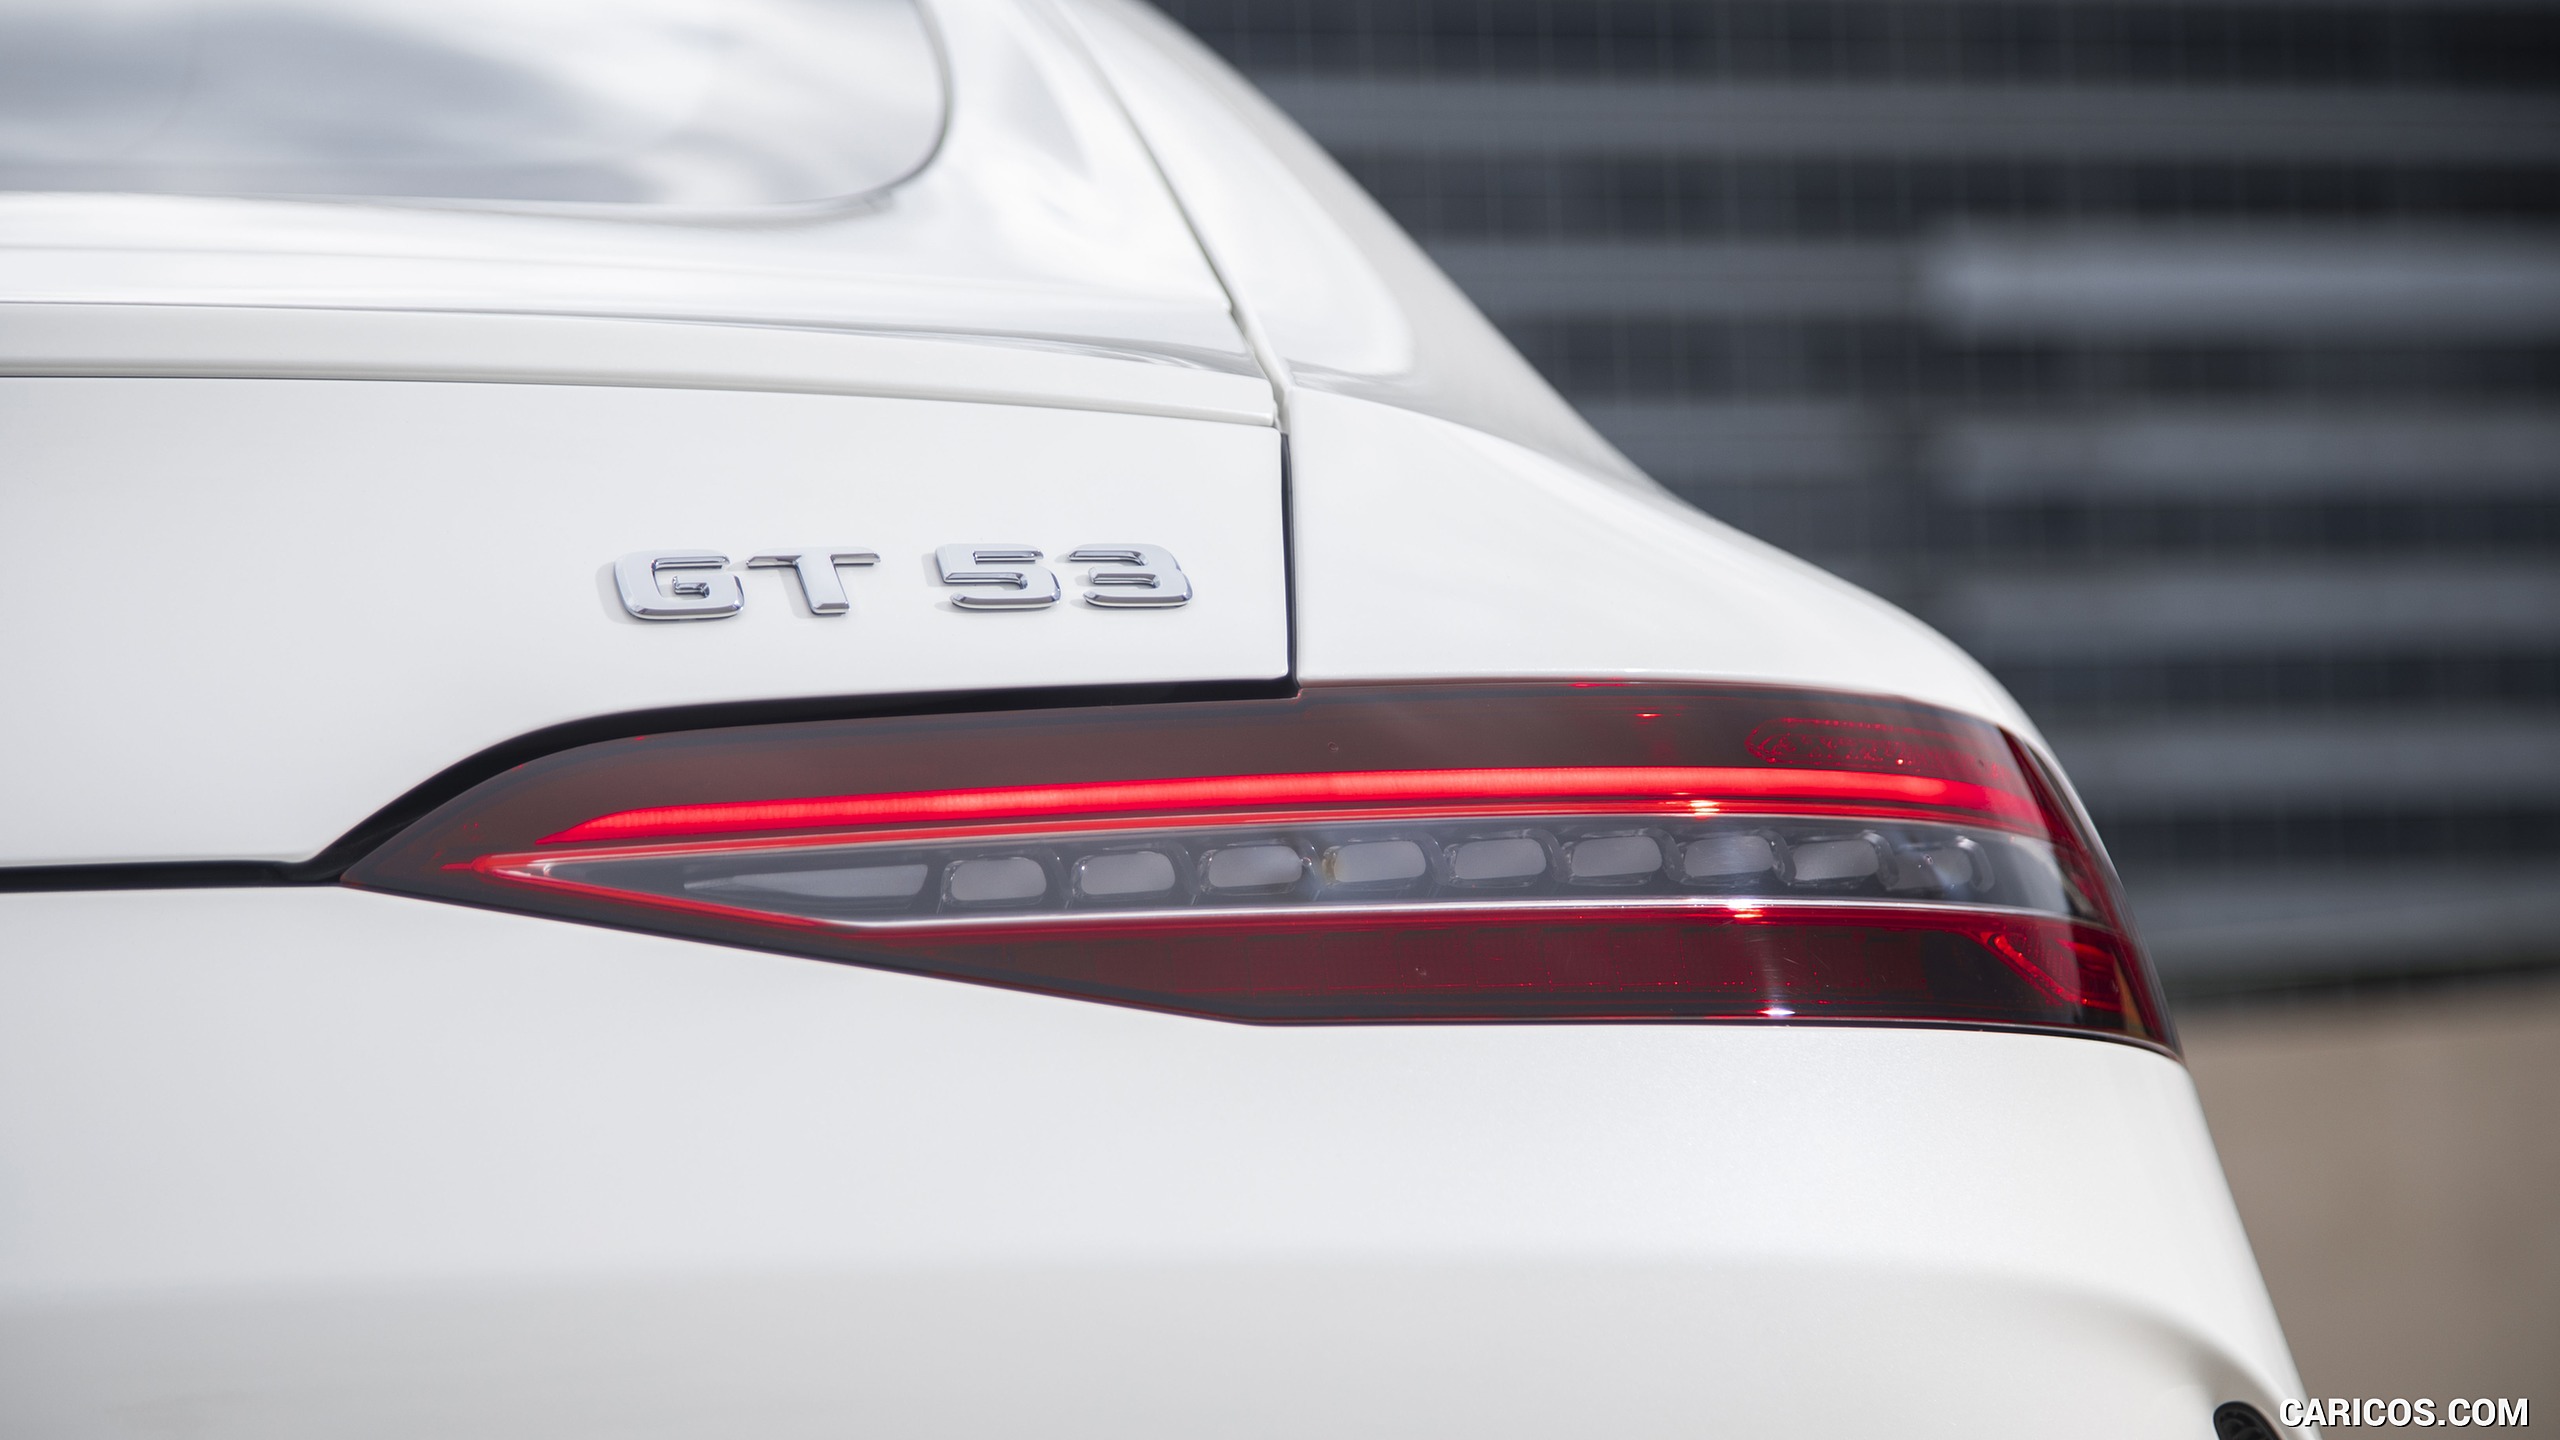 2019 Mercedes-AMG GT 53 4-Door Coupe (US-Spec) - Tail Light, #338 of 427